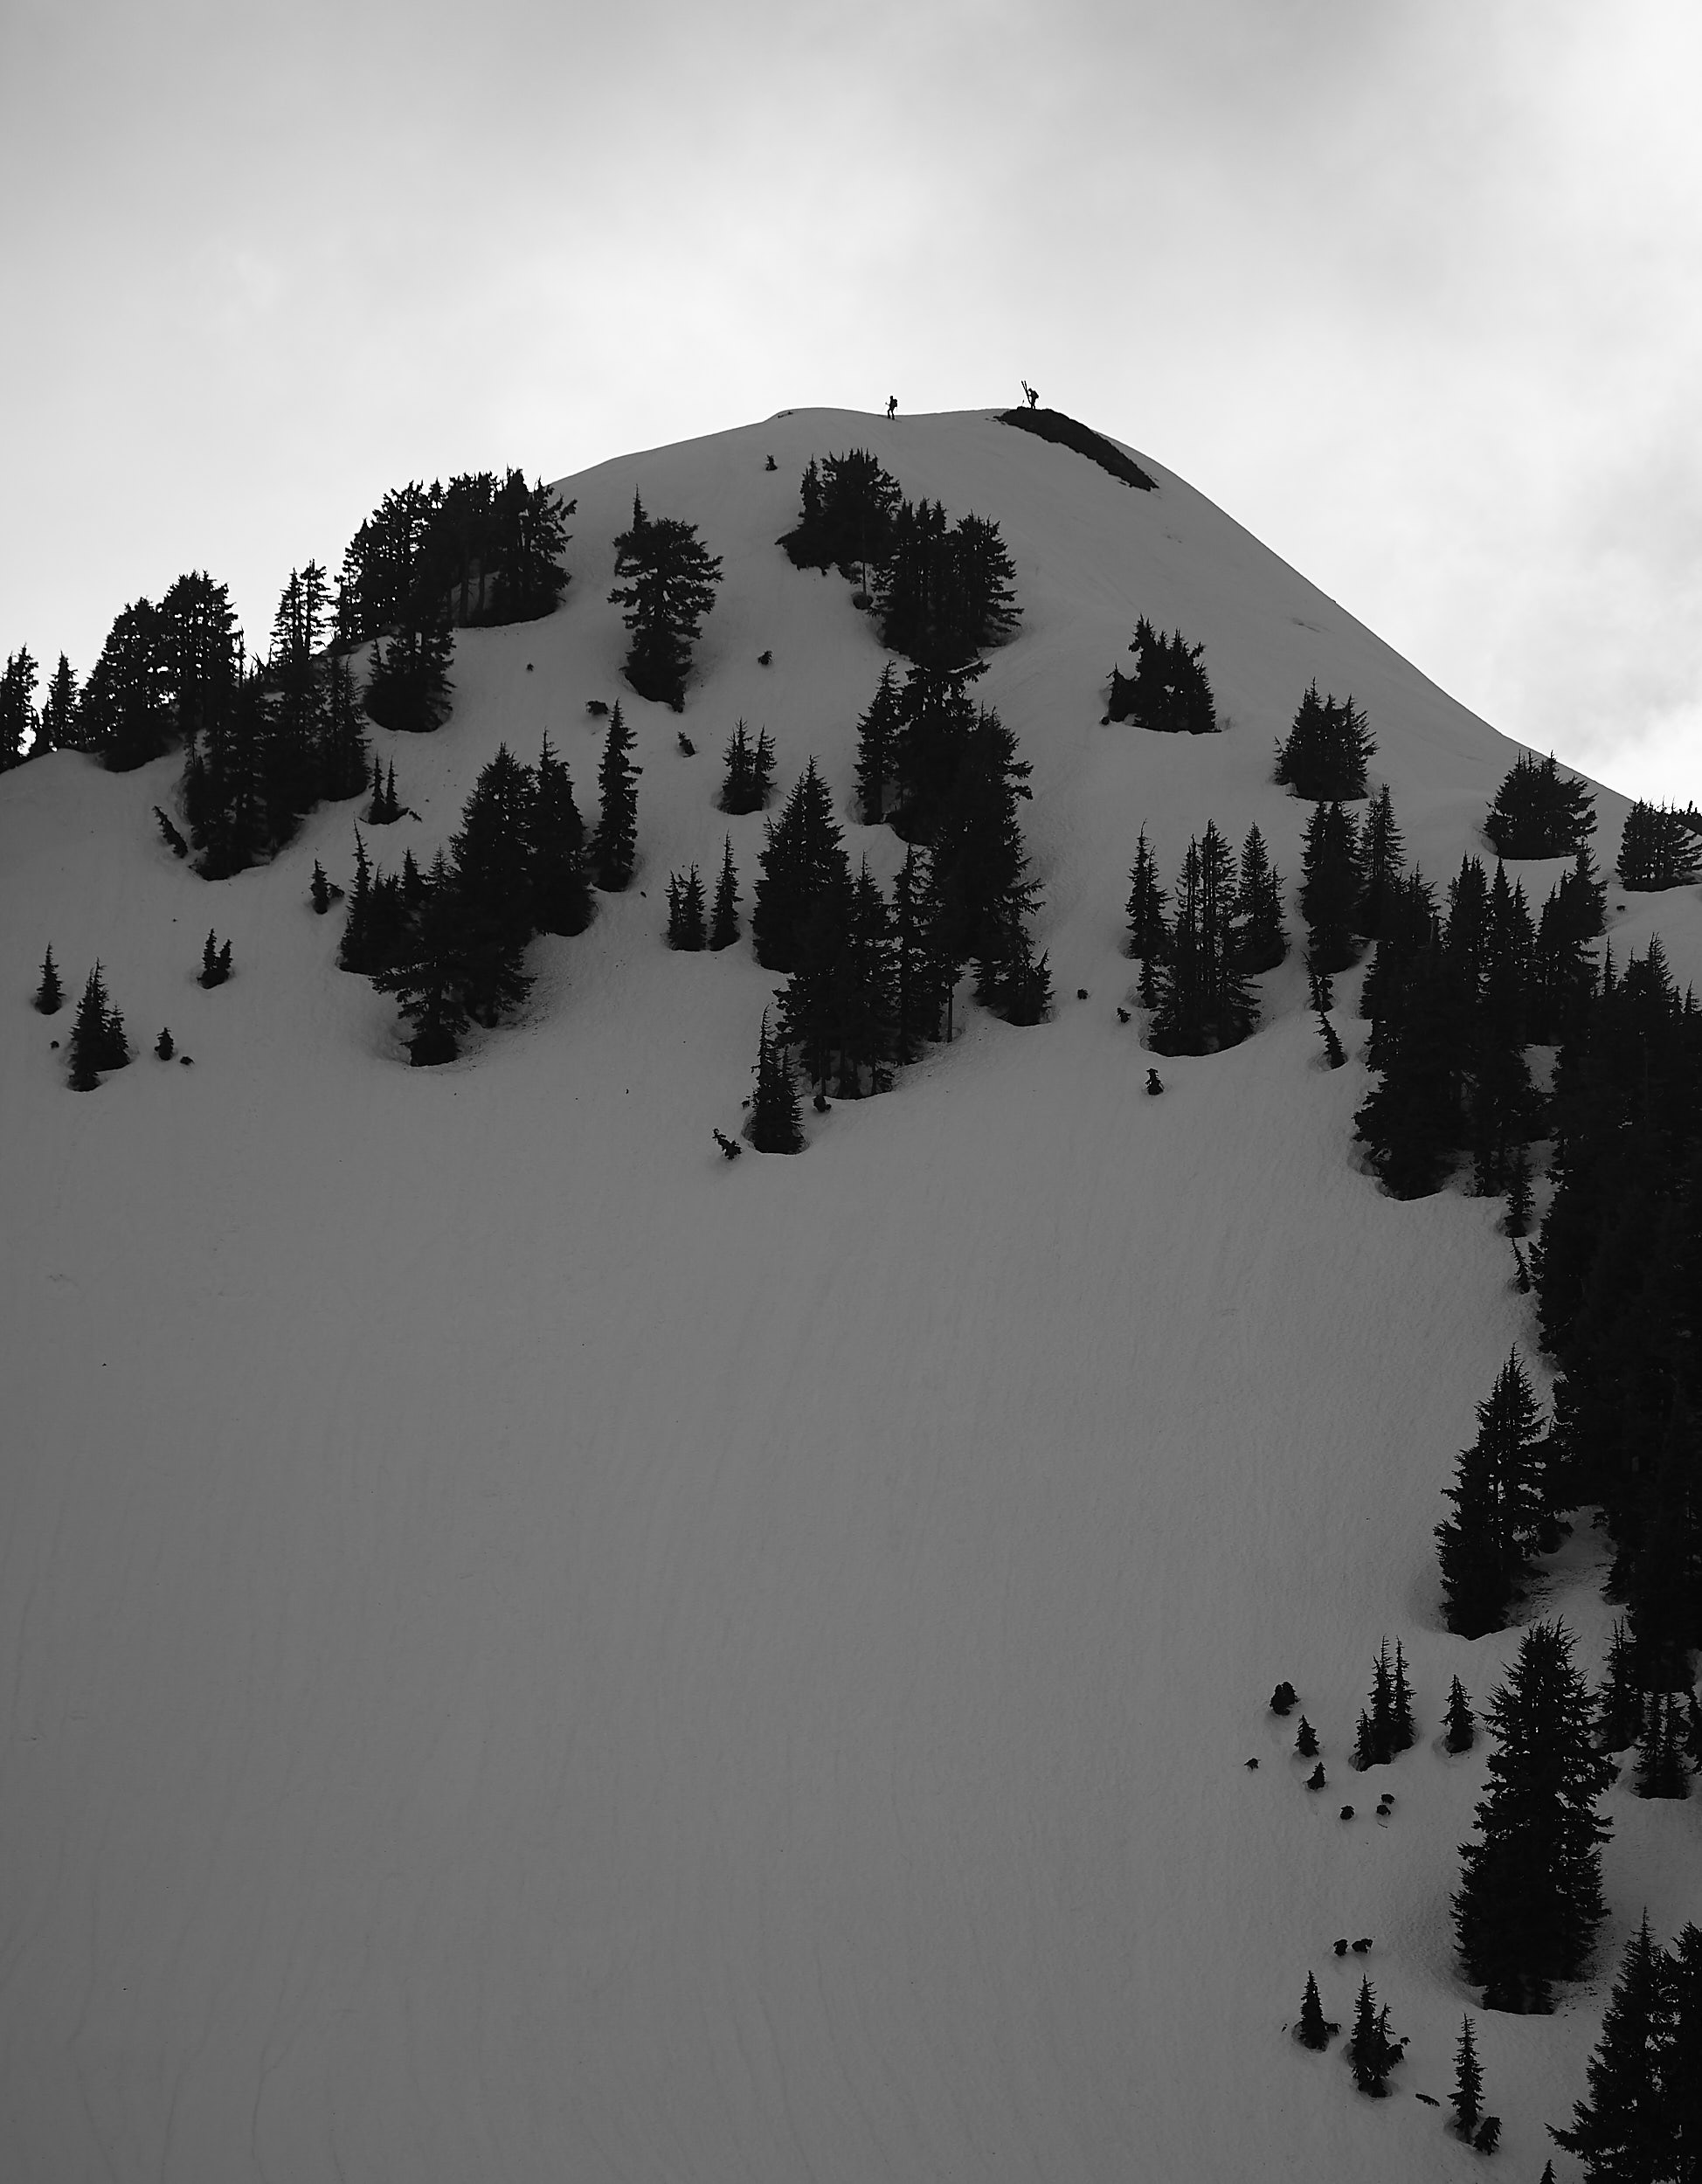  Two of the people staying in the hut can be seen here at the top of nearby peak ready to ski down. 